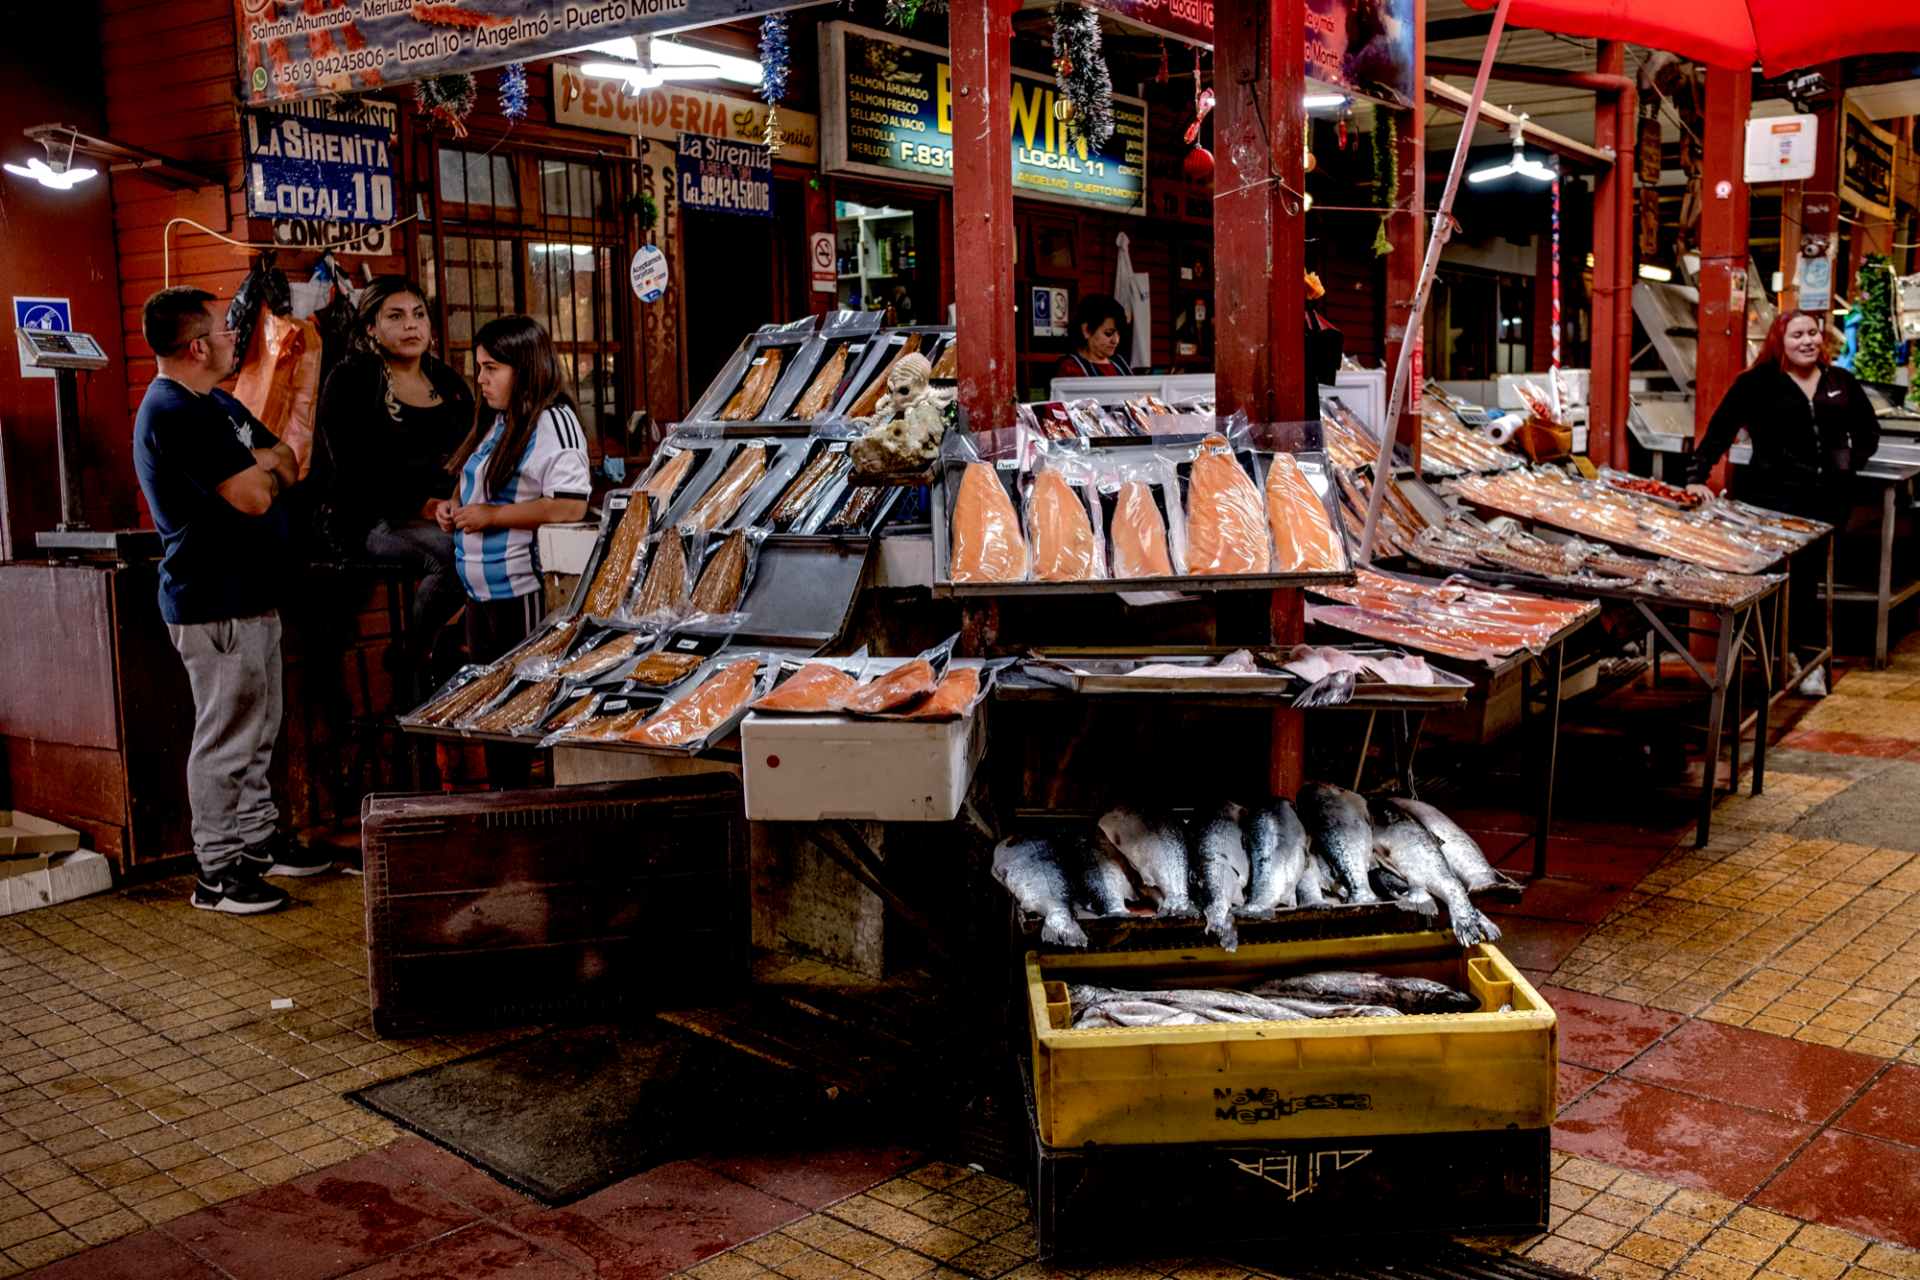 Salmon for sale at the Angelmo Fish Market in Puerto Montt. When asked where the salmon came from, the seller said somewhere in the region but she wasn’t sure where. (Photo: Cristobal Venegas)